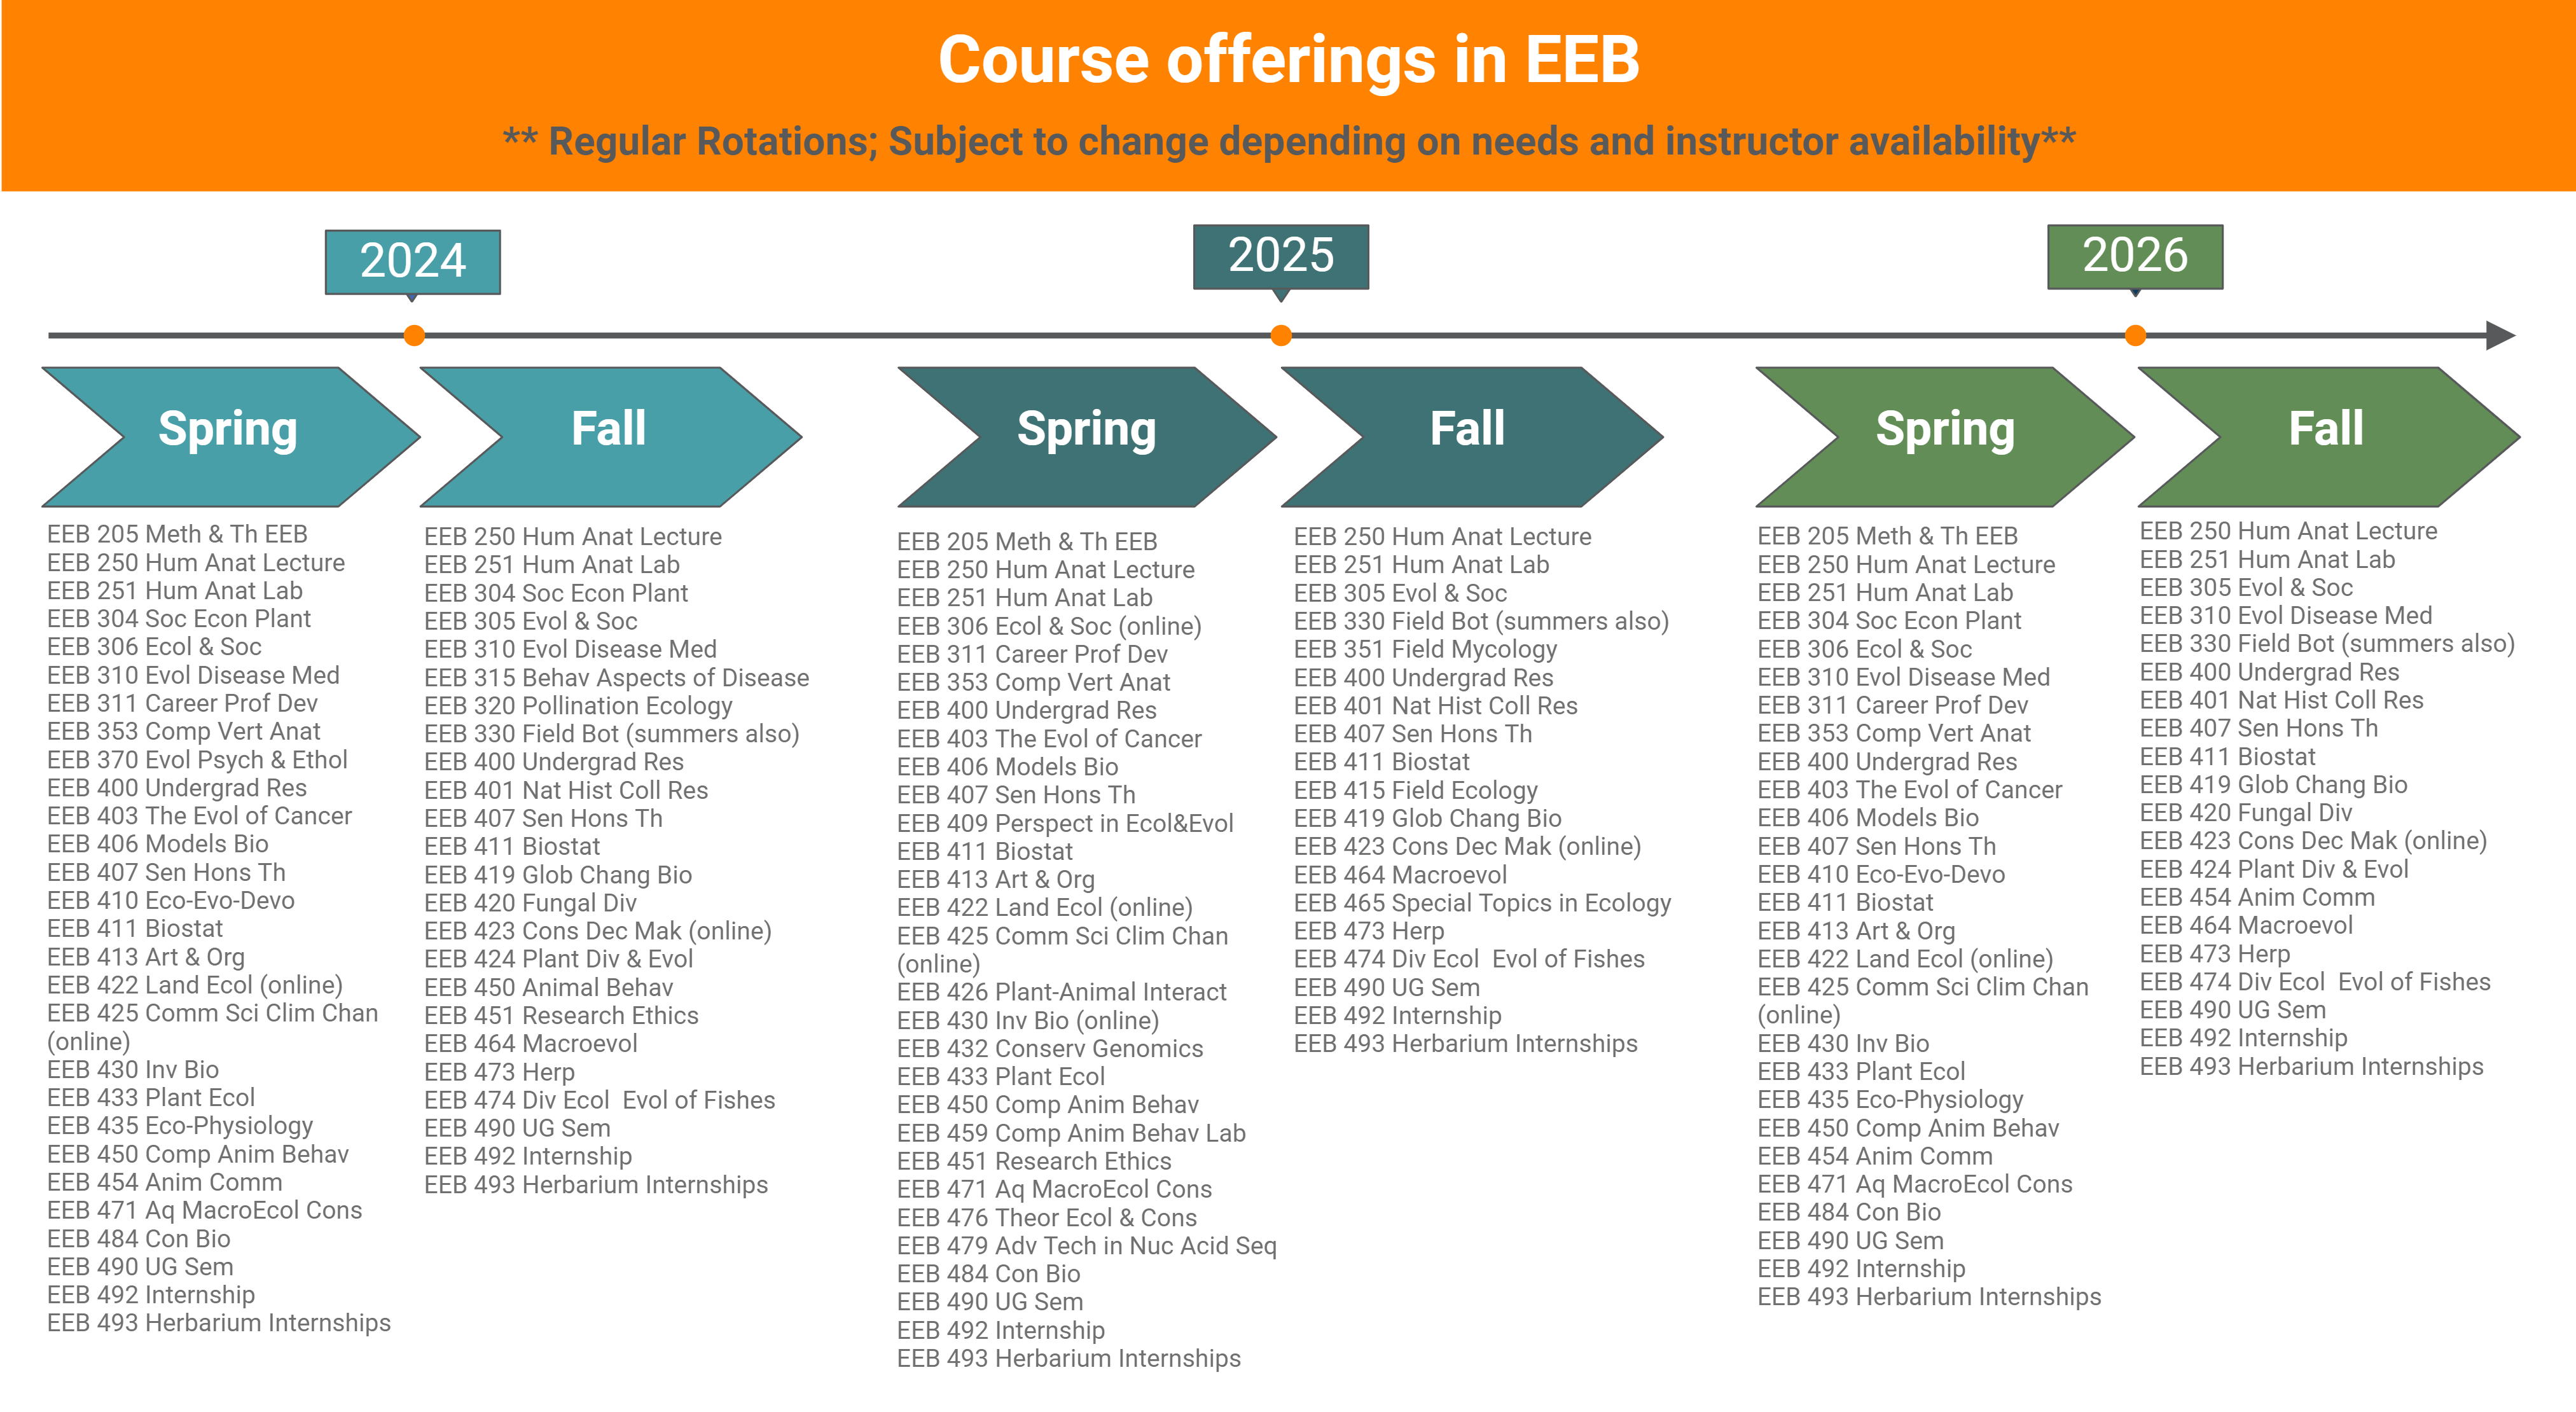 Graphic showing course offerings in EEB